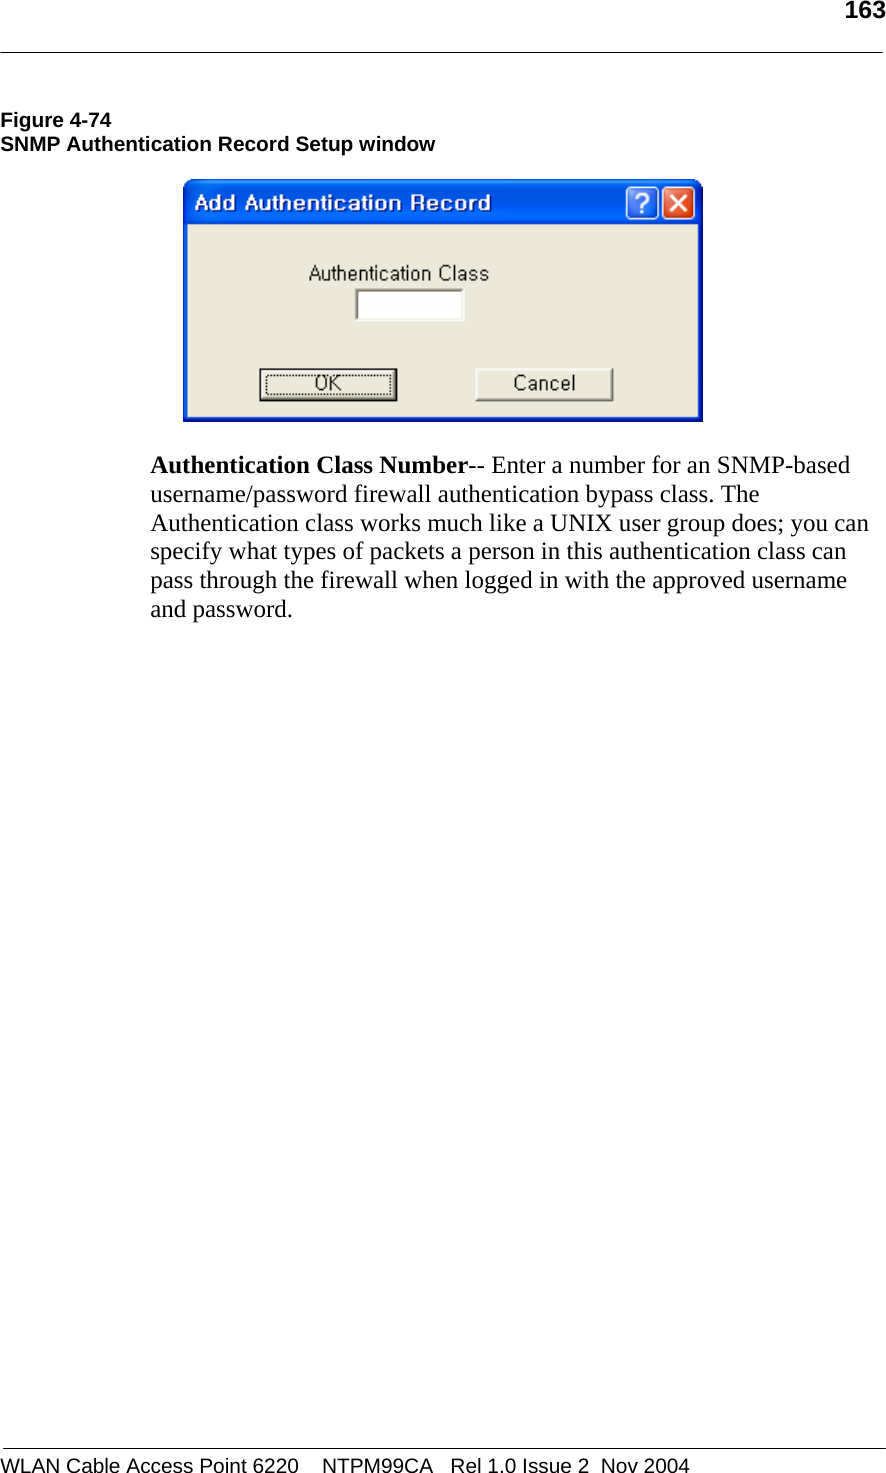   163  WLAN Cable Access Point 6220    NTPM99CA   Rel 1.0 Issue 2  Nov 2004 Figure 4-74 SNMP Authentication Record Setup window    Authentication Class Number-- Enter a number for an SNMP-based username/password firewall authentication bypass class. The Authentication class works much like a UNIX user group does; you can specify what types of packets a person in this authentication class can pass through the firewall when logged in with the approved username and password.   